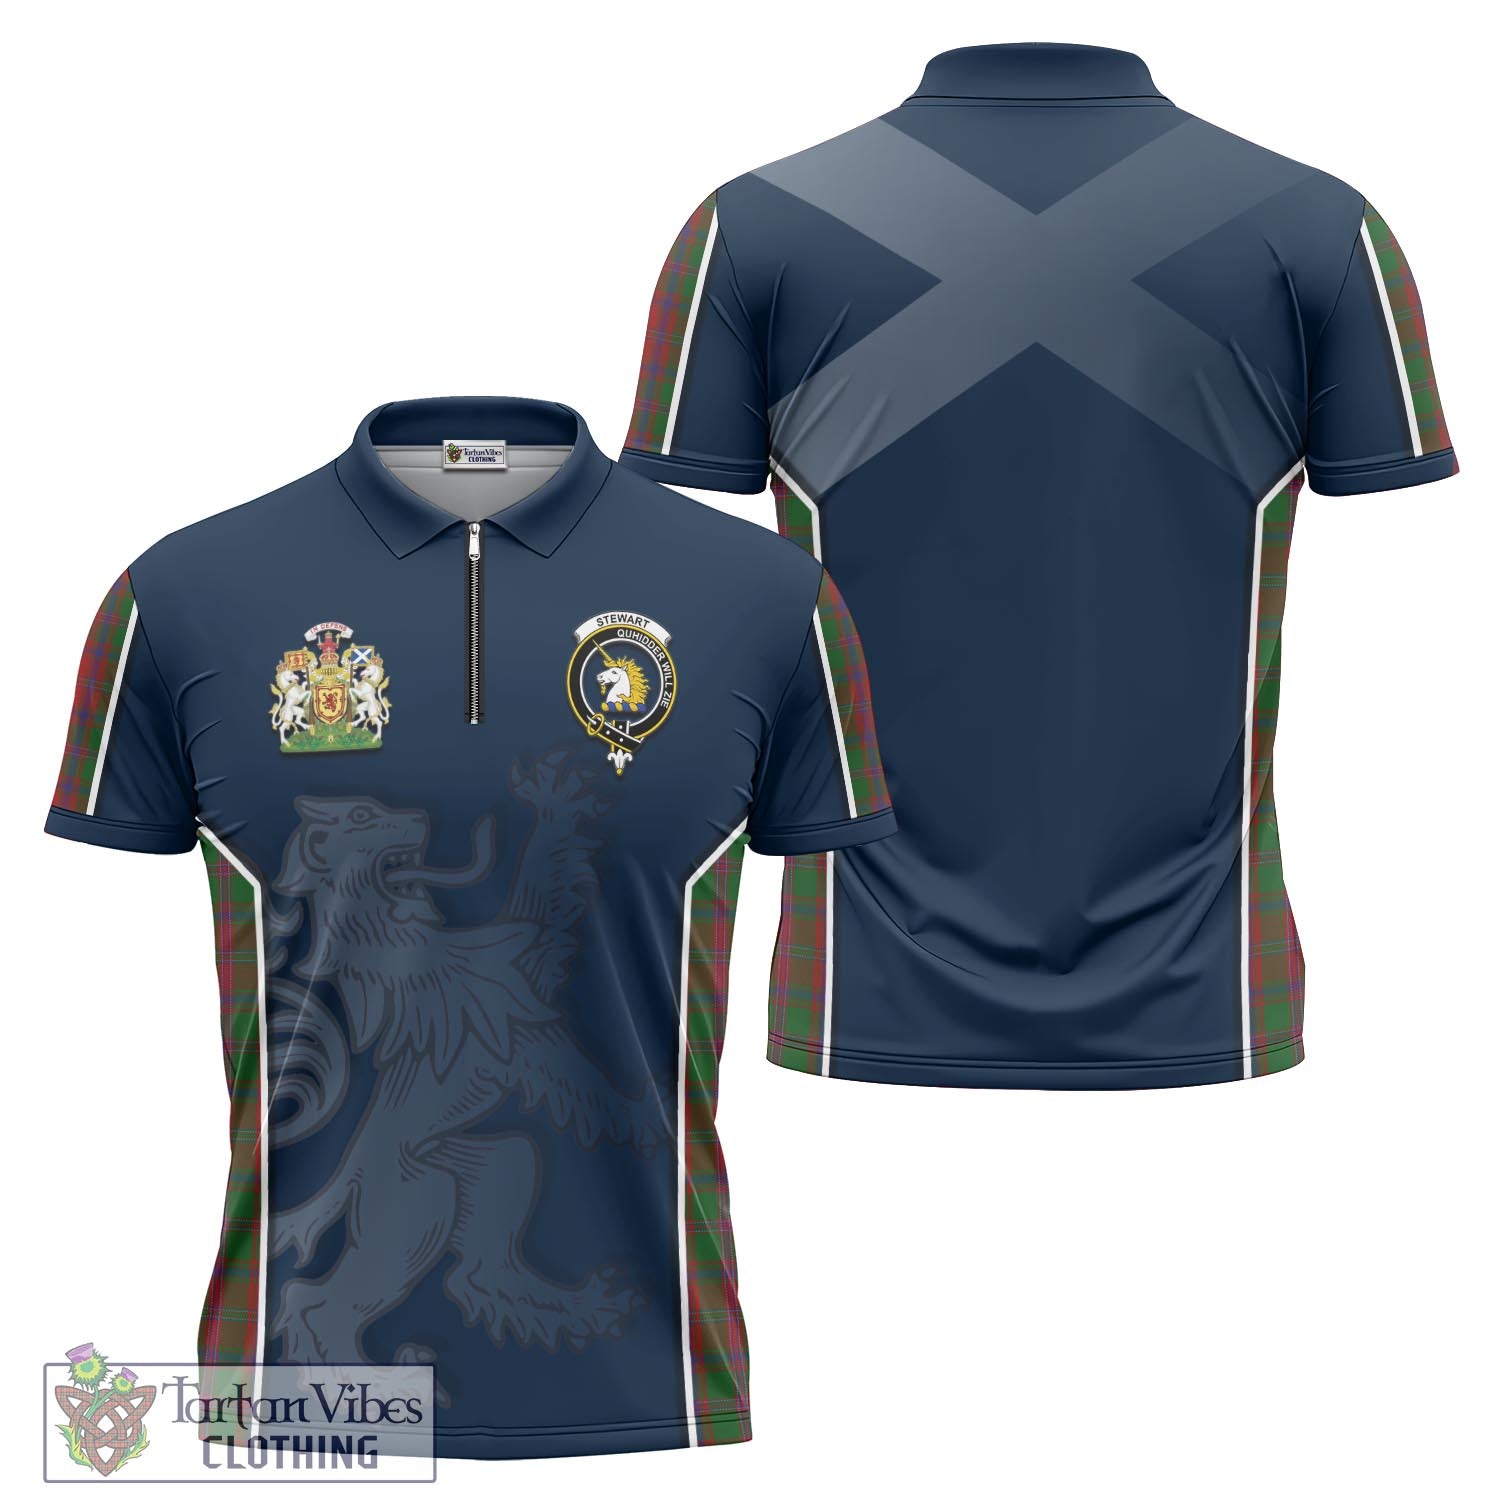 Tartan Vibes Clothing Stewart of Appin Tartan Zipper Polo Shirt with Family Crest and Lion Rampant Vibes Sport Style